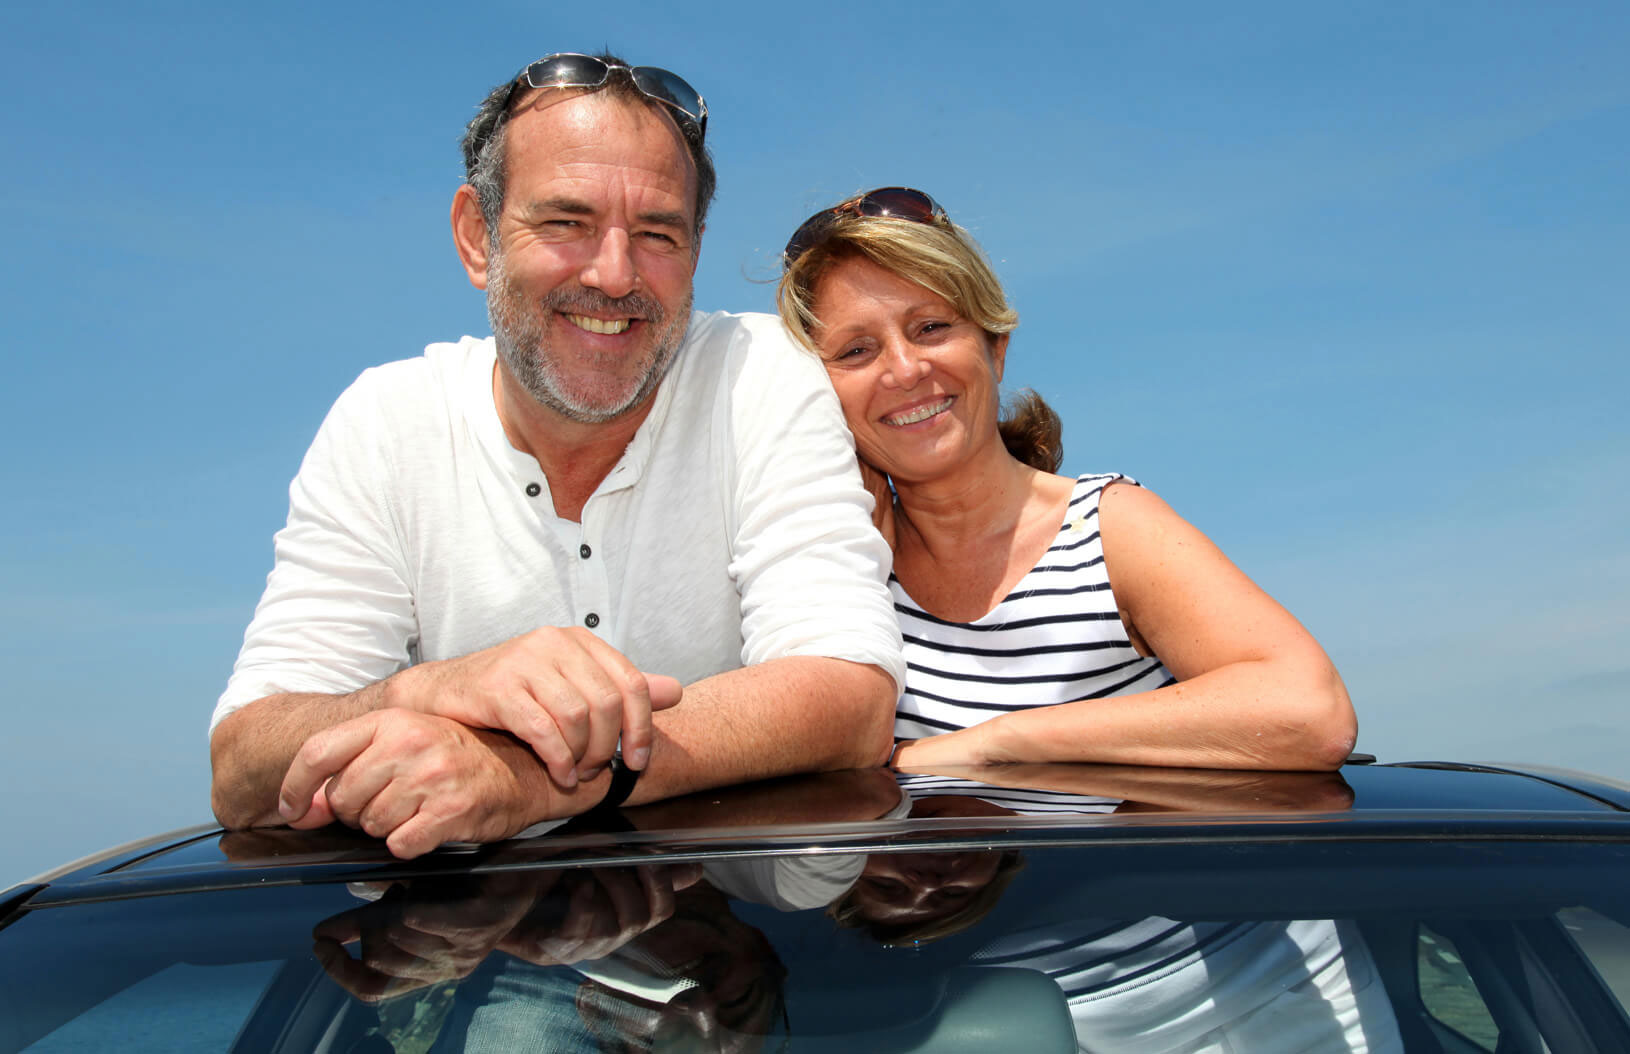 A man and woman smiling while standing in the sunroof of their car